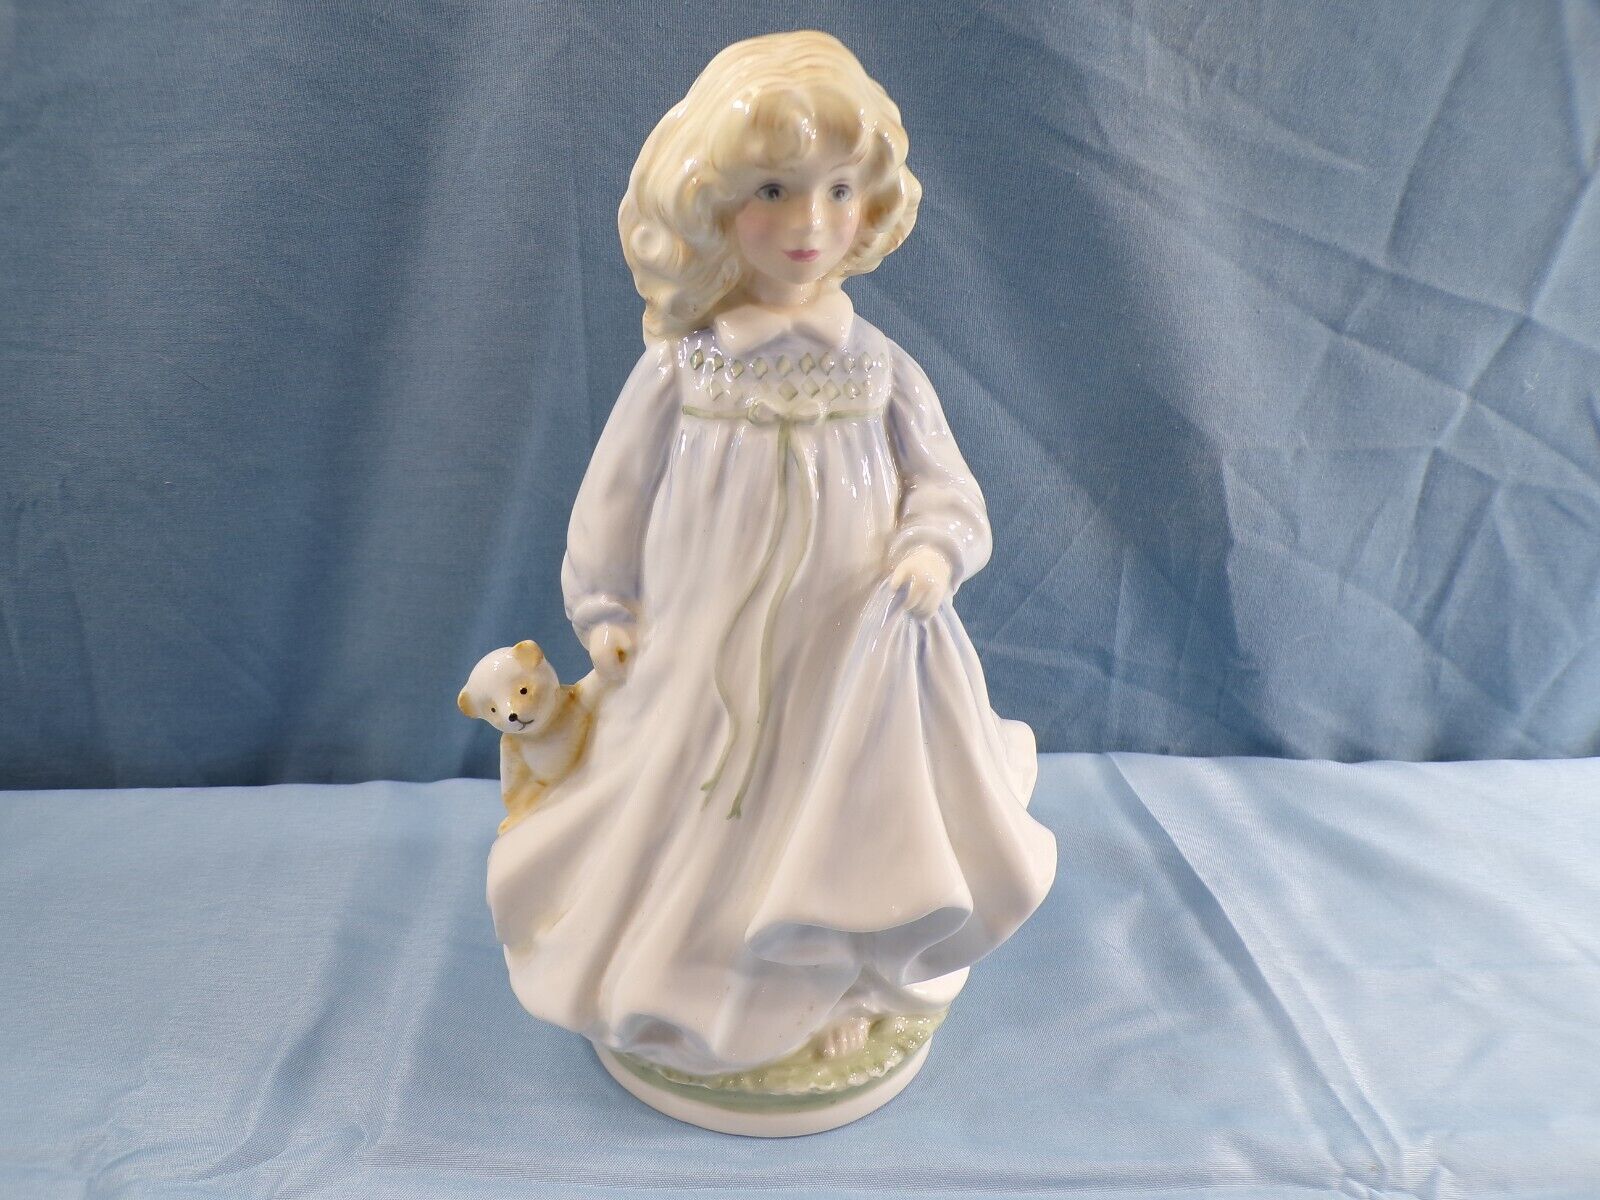 Limited Edition Royal Doulton Figurine HN3061 Hope - Exc. Condition